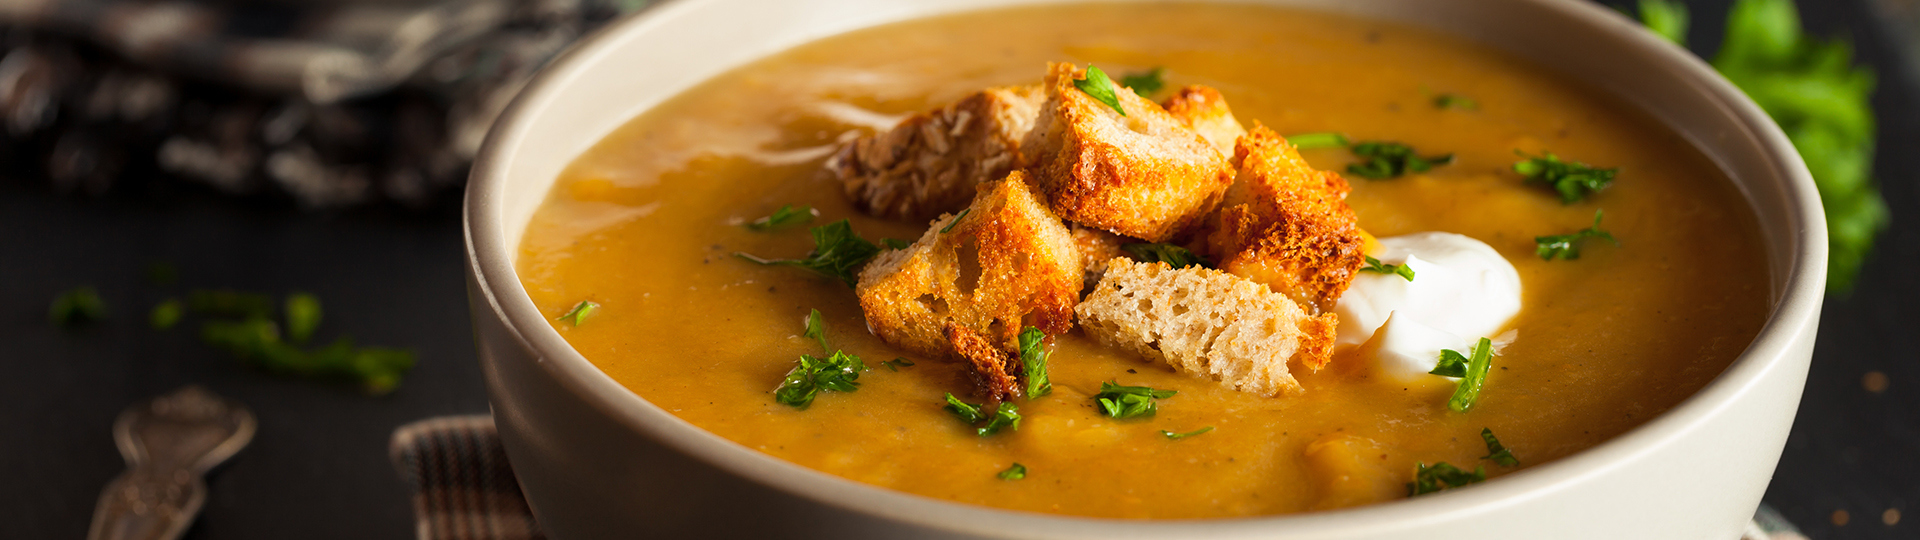 Orange bisque-style soup in grey bowl topped with herbs, croutons and cream.